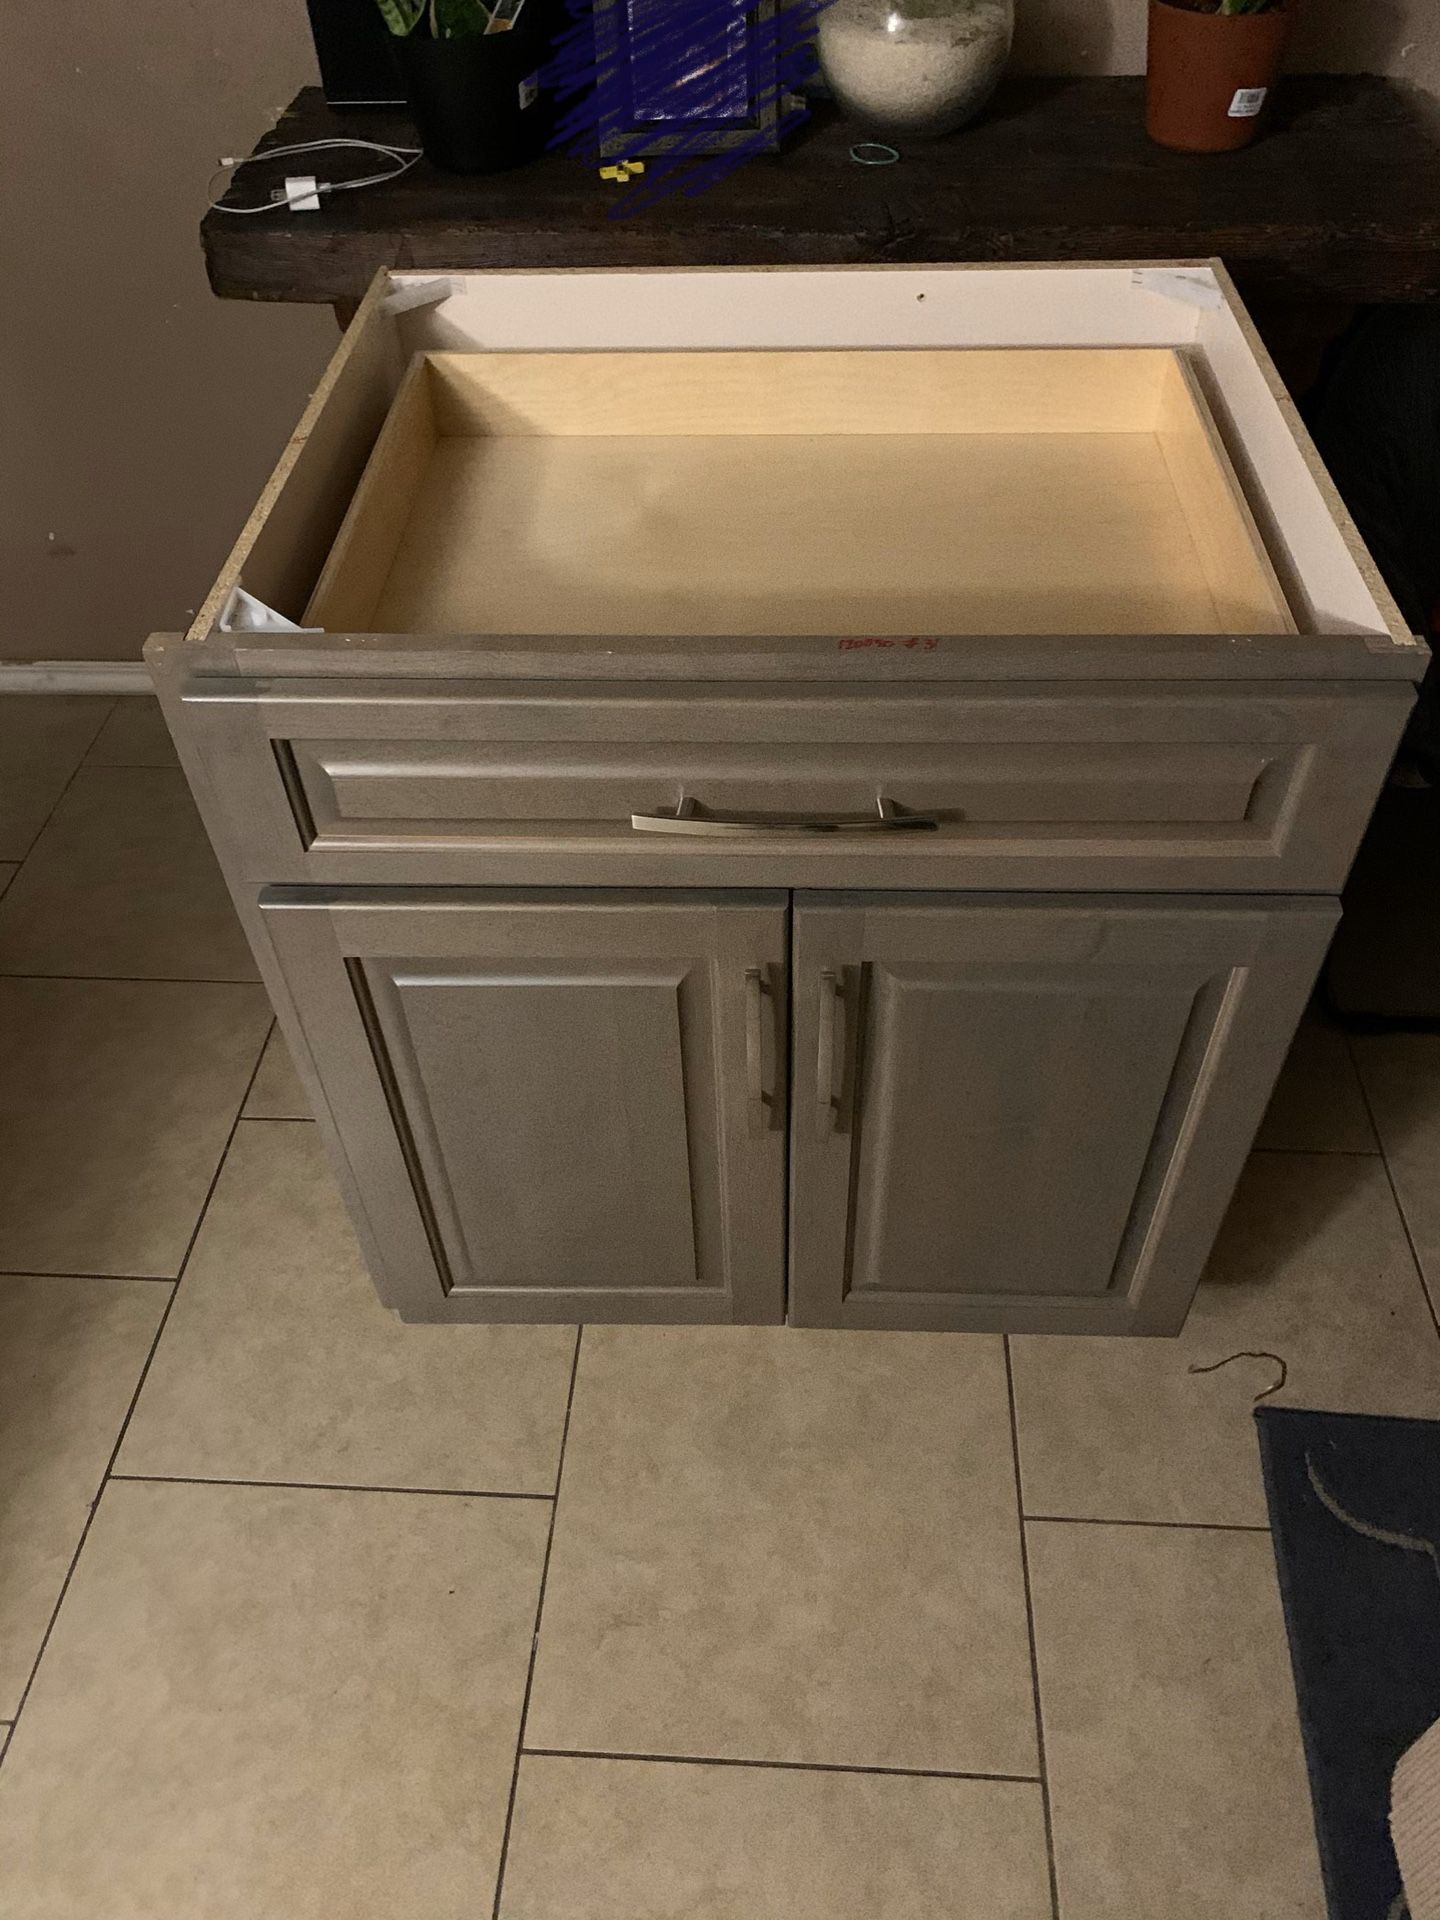 Cabinets for kitchen/ laundry room